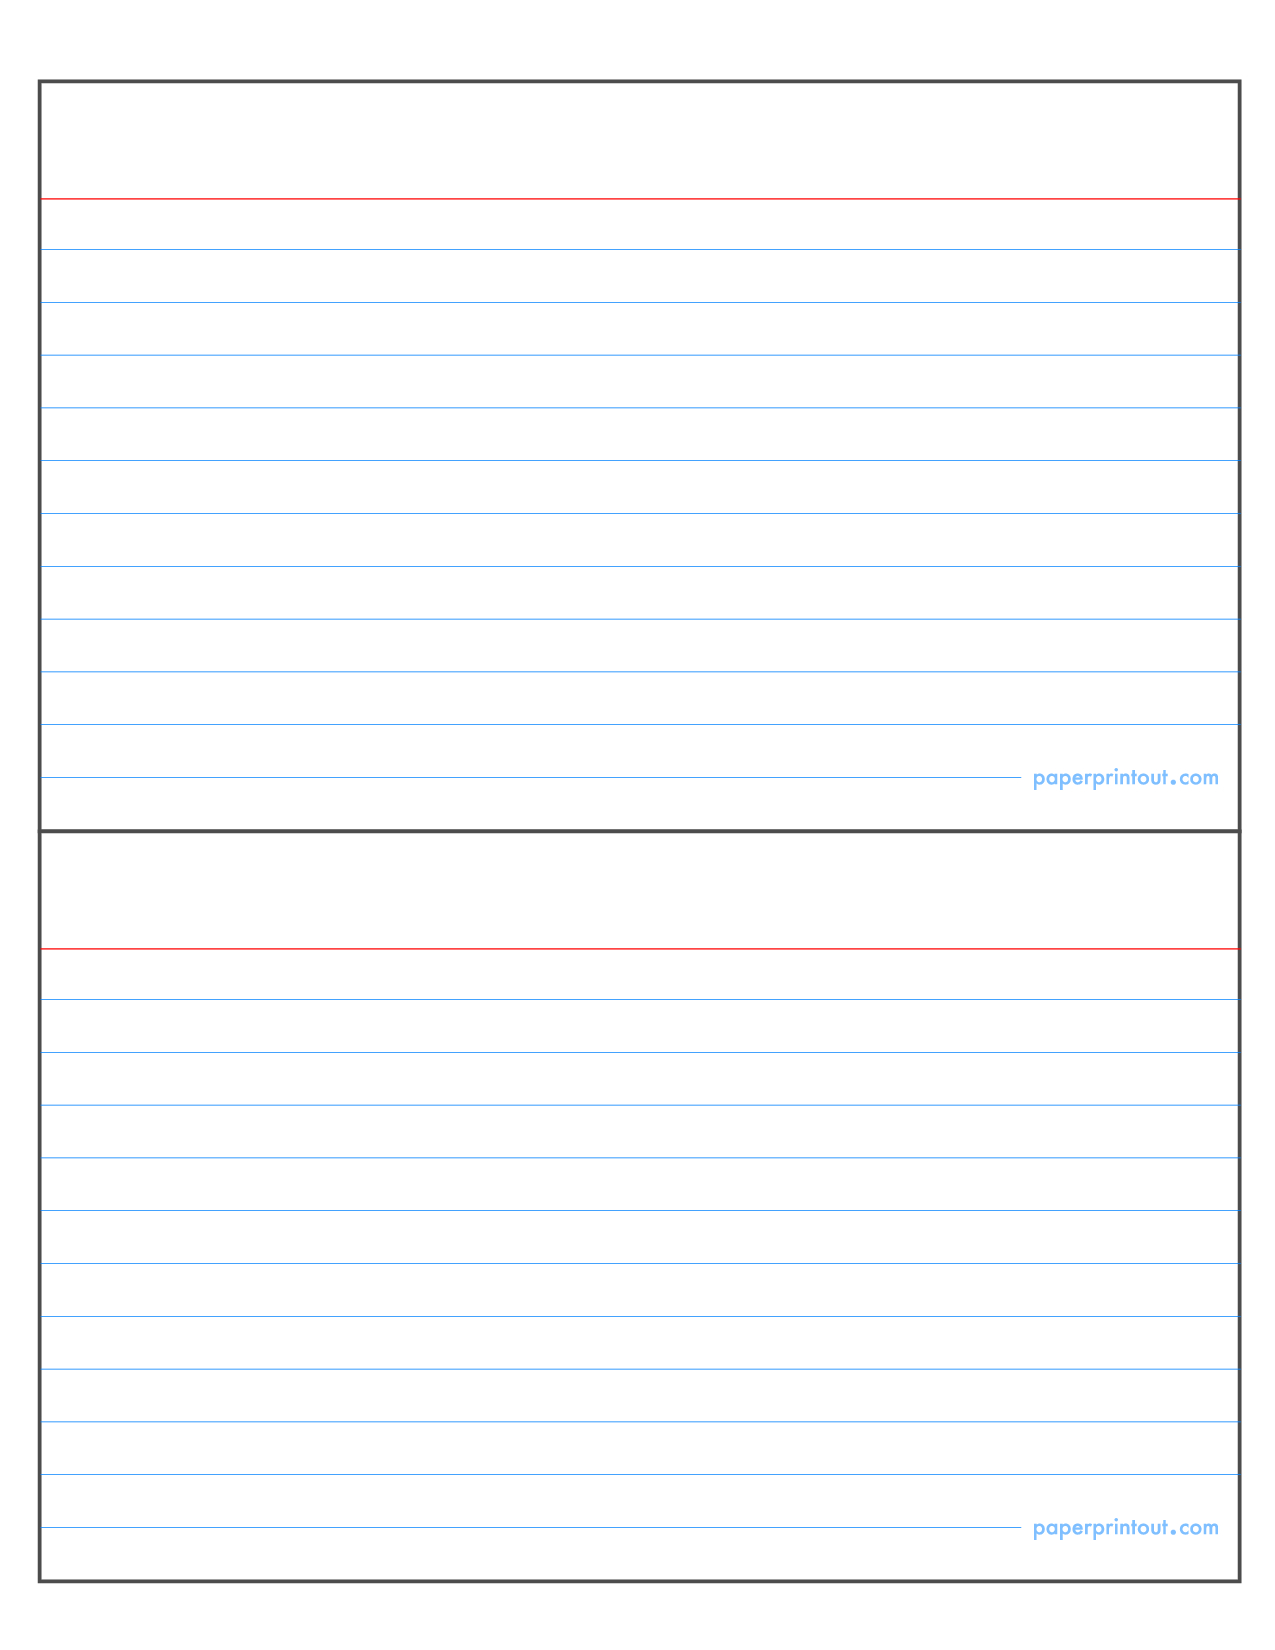 3X5 Index Card Template For Microsoft Word - Falep Intended For 5 By 8 Index Card Template